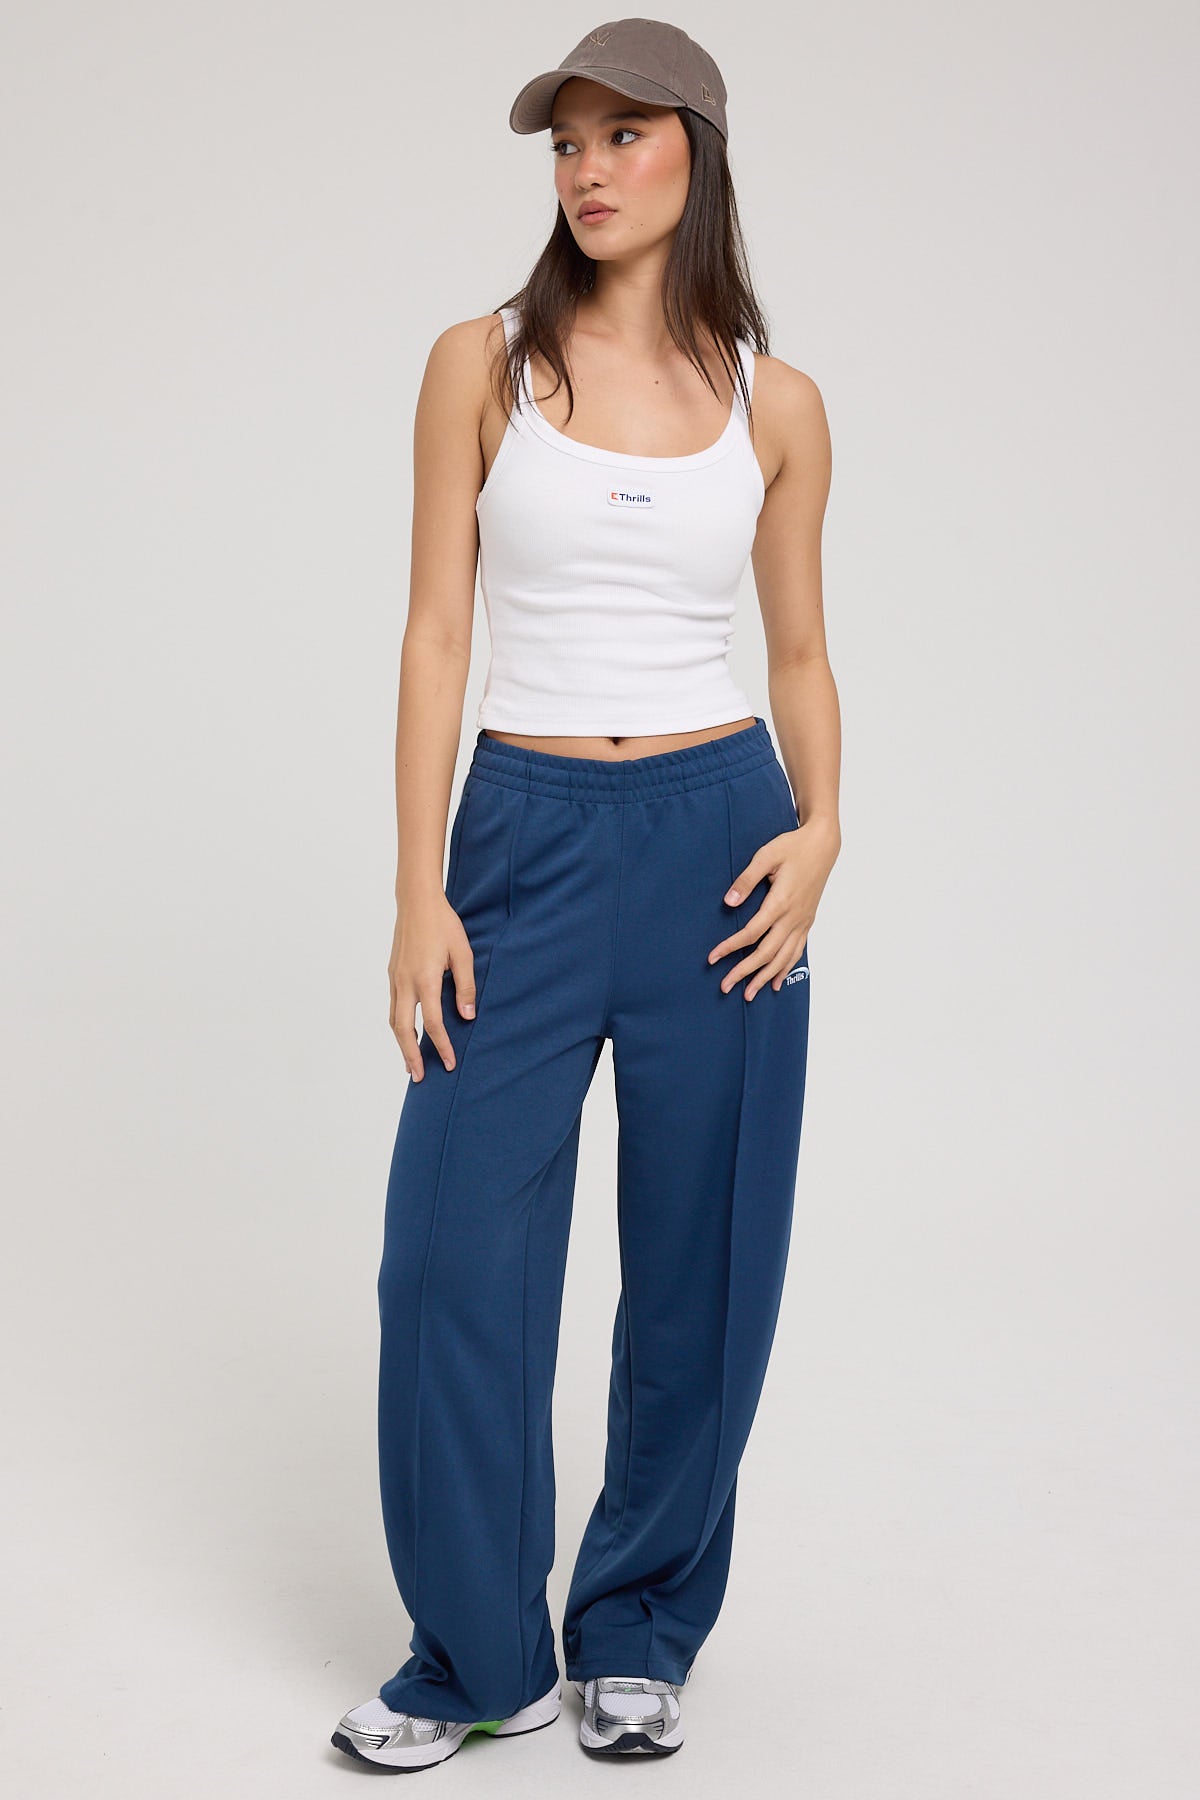 Thrills Sphere Tricot Track Pant Ensign Blue